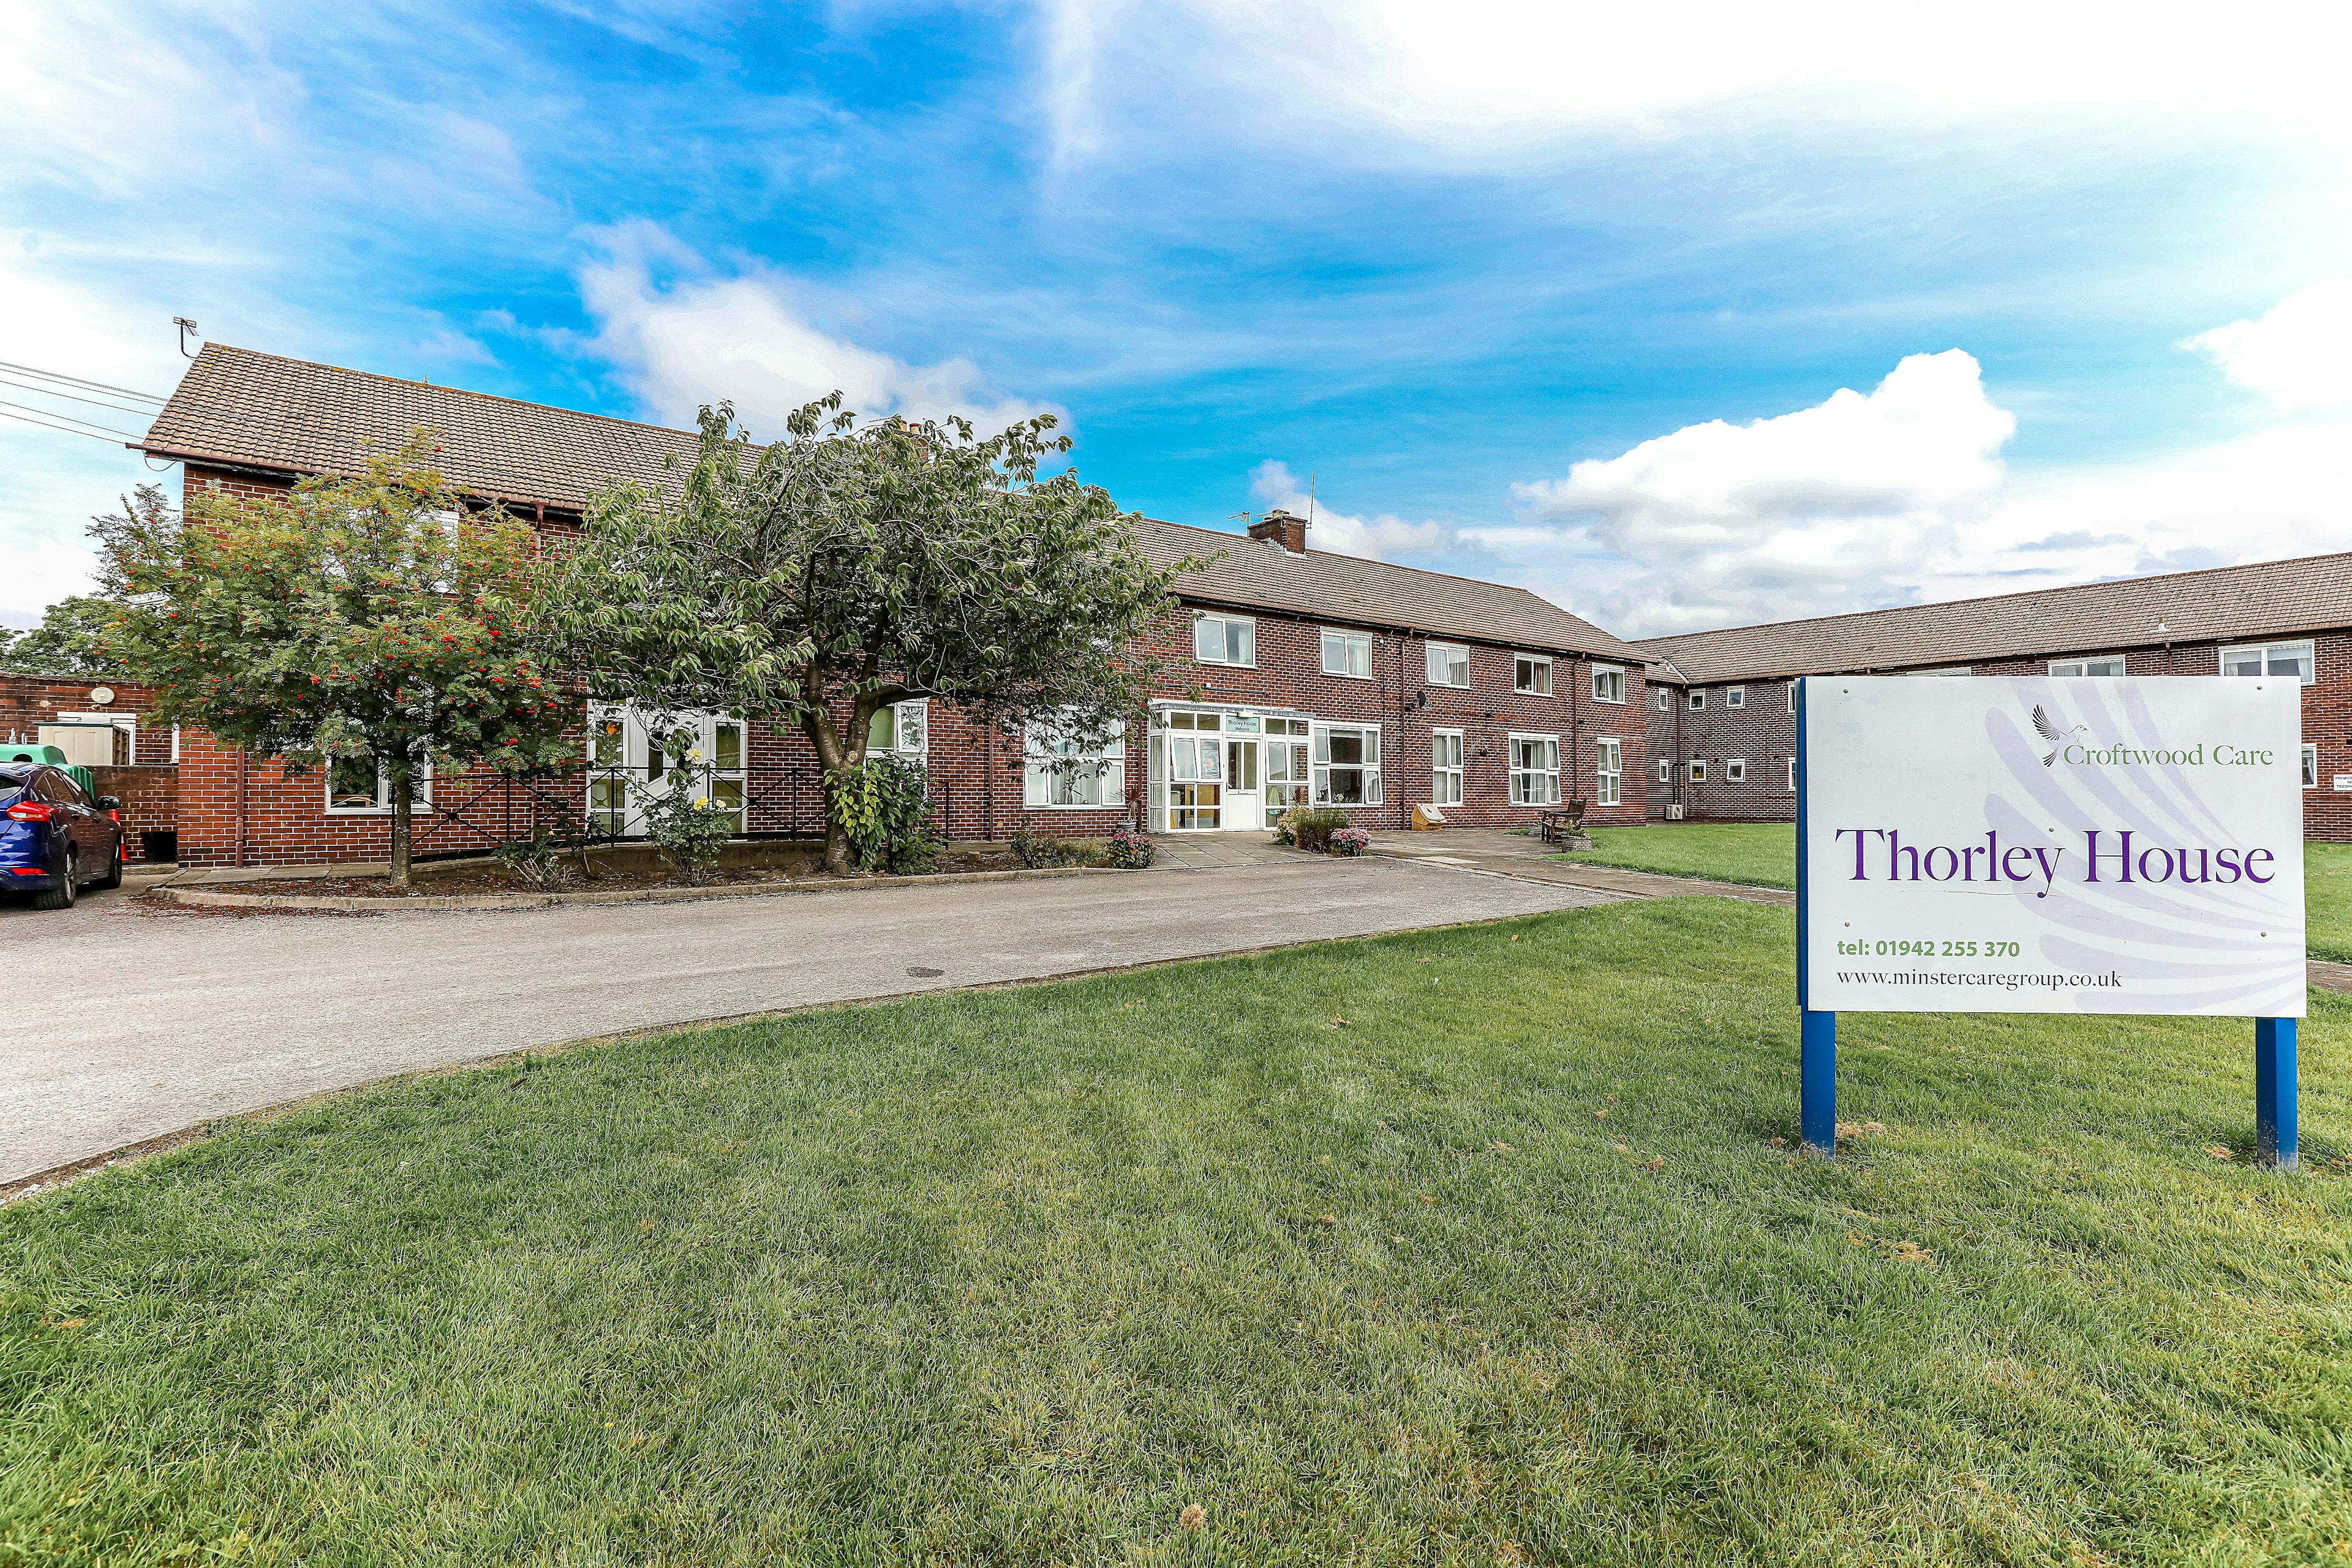 Minster Care Group - Thorley House care home 11